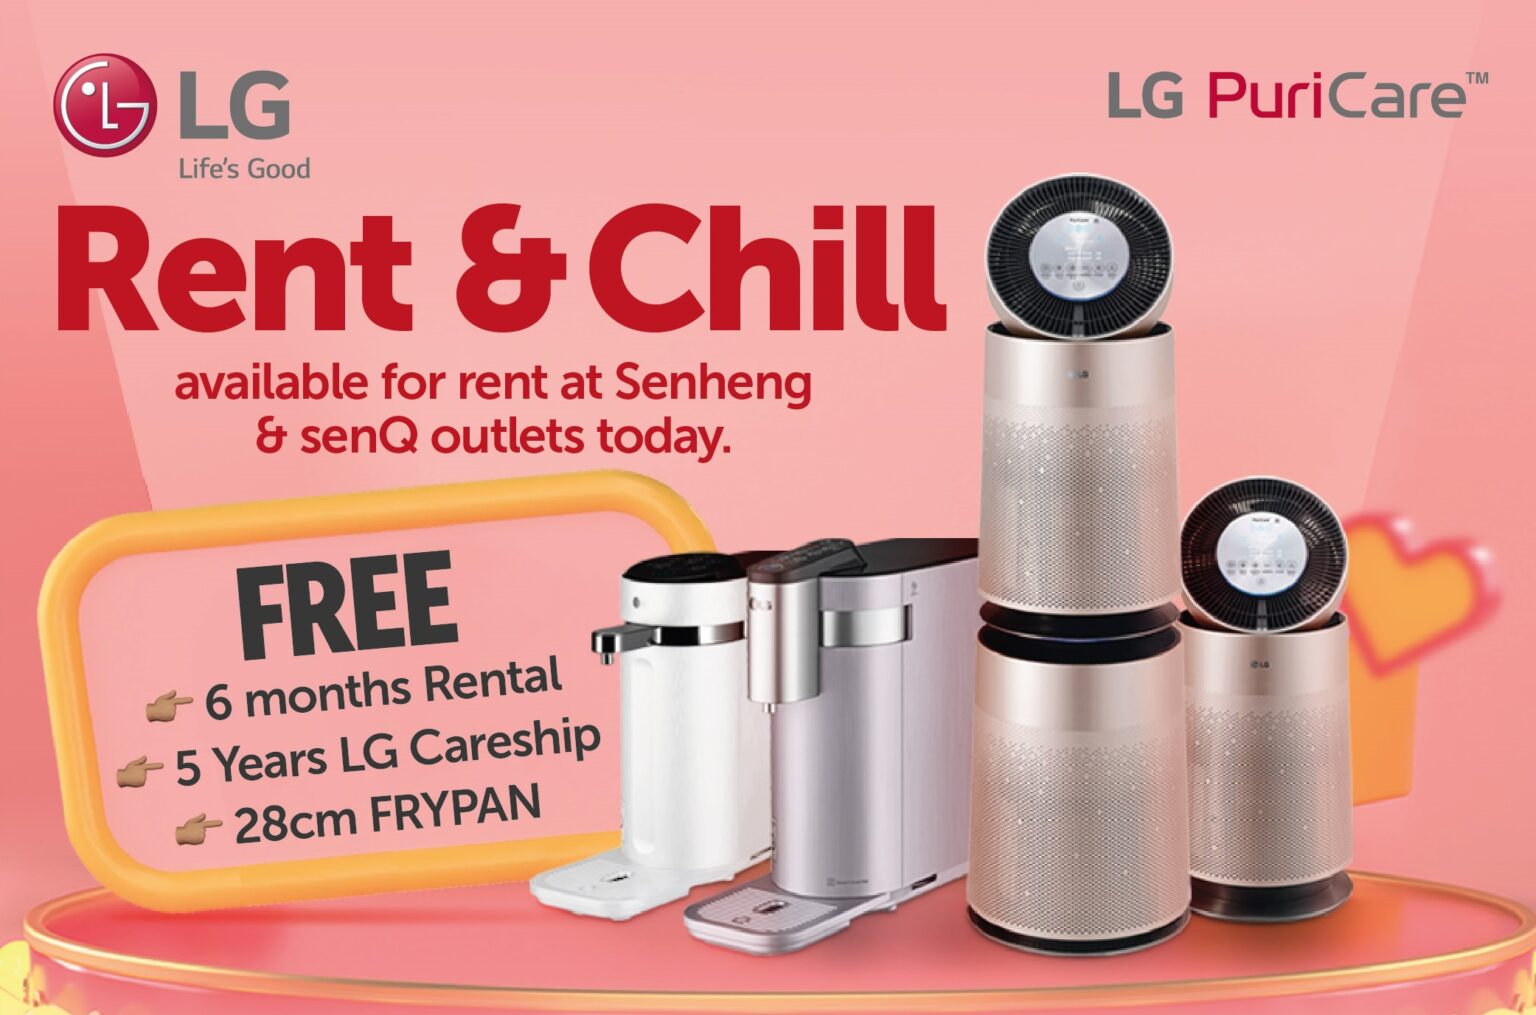 Drink Cleaner, Breathe Better: With LG Electronics and Senheng’s Rent and Chill